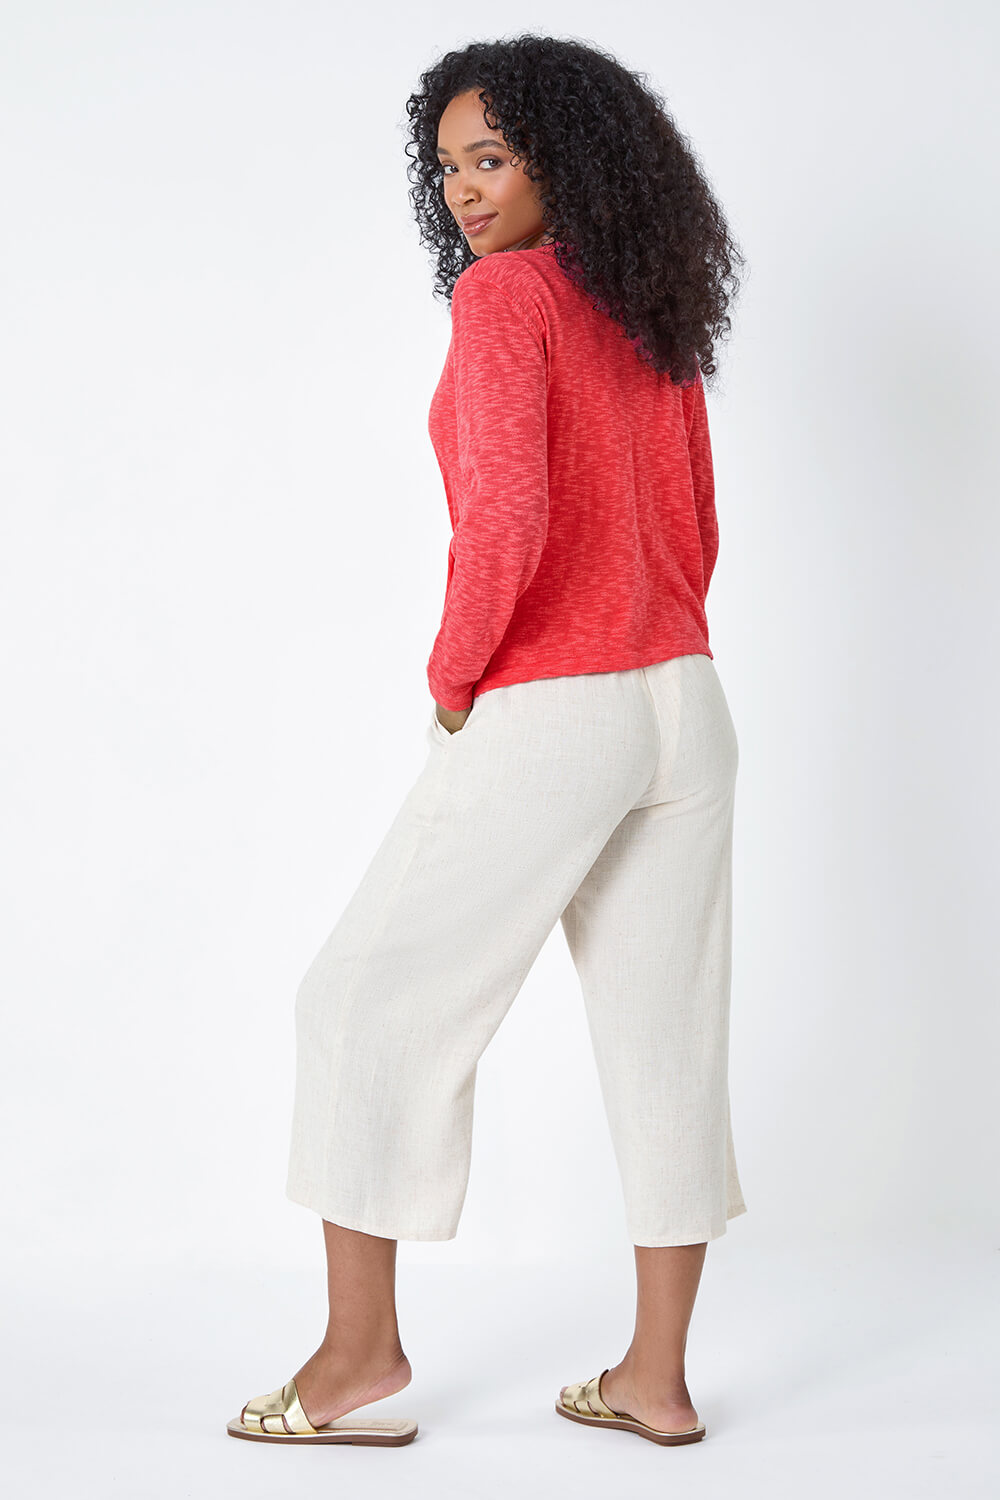 CORAL Petite Waterfall Front Cotton Knit Cardigan, Image 3 of 5